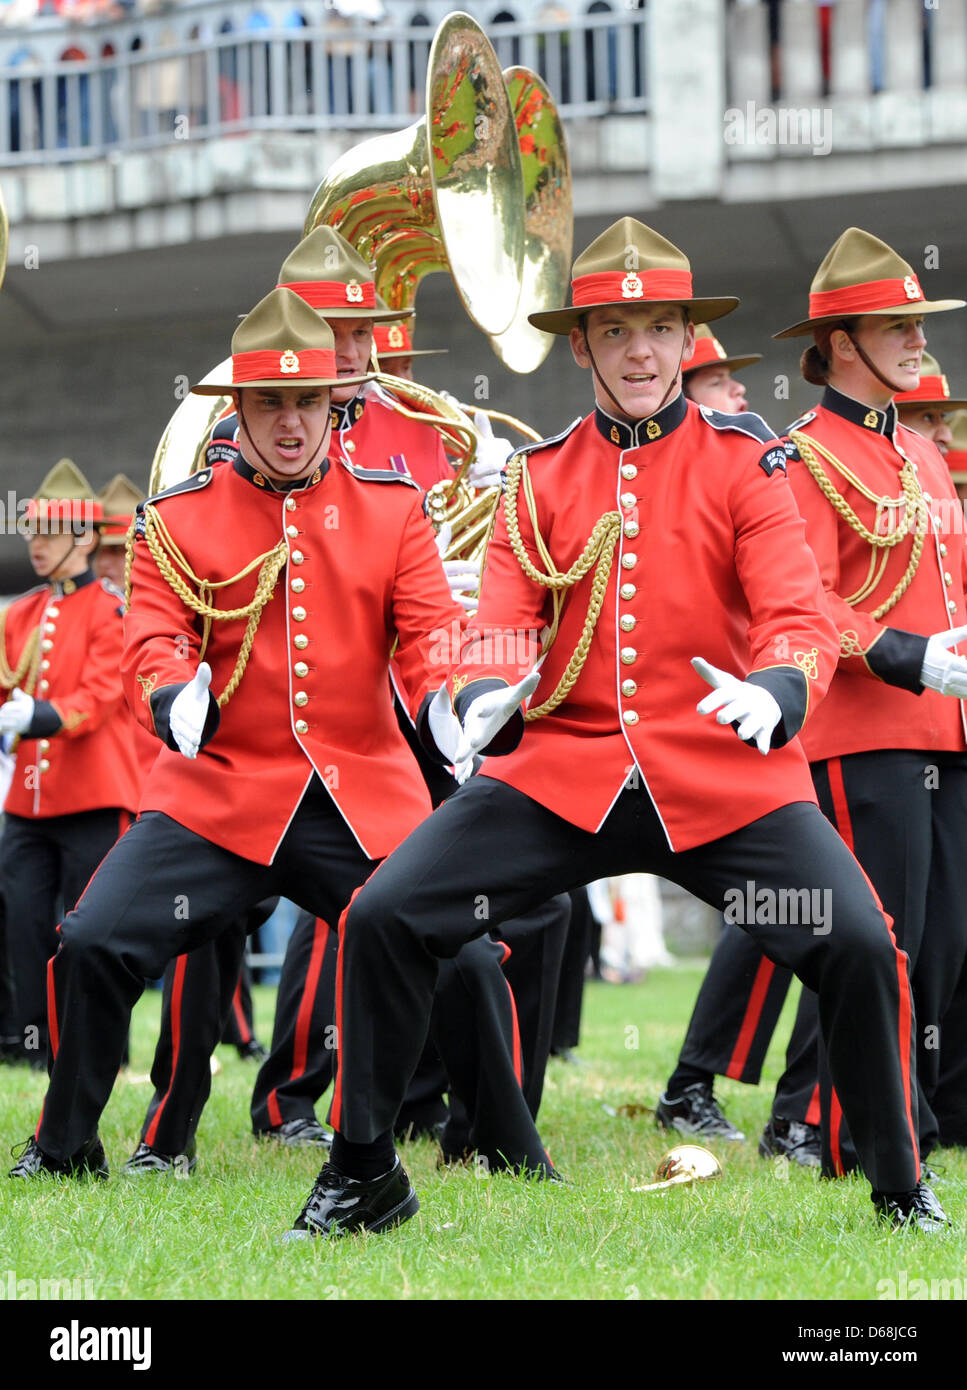 The 'New Zealand Army Band' from New Zealand plays during the Basel-based military music festival 'Basel Tattoo's' visit to  Freiburg, Germany, 16 July 2012. 300 musicians from 4 continents participate in a parade. The festival runs from 13 to 21 July in Basel. Photo: PATRICK SEEGER Stock Photo